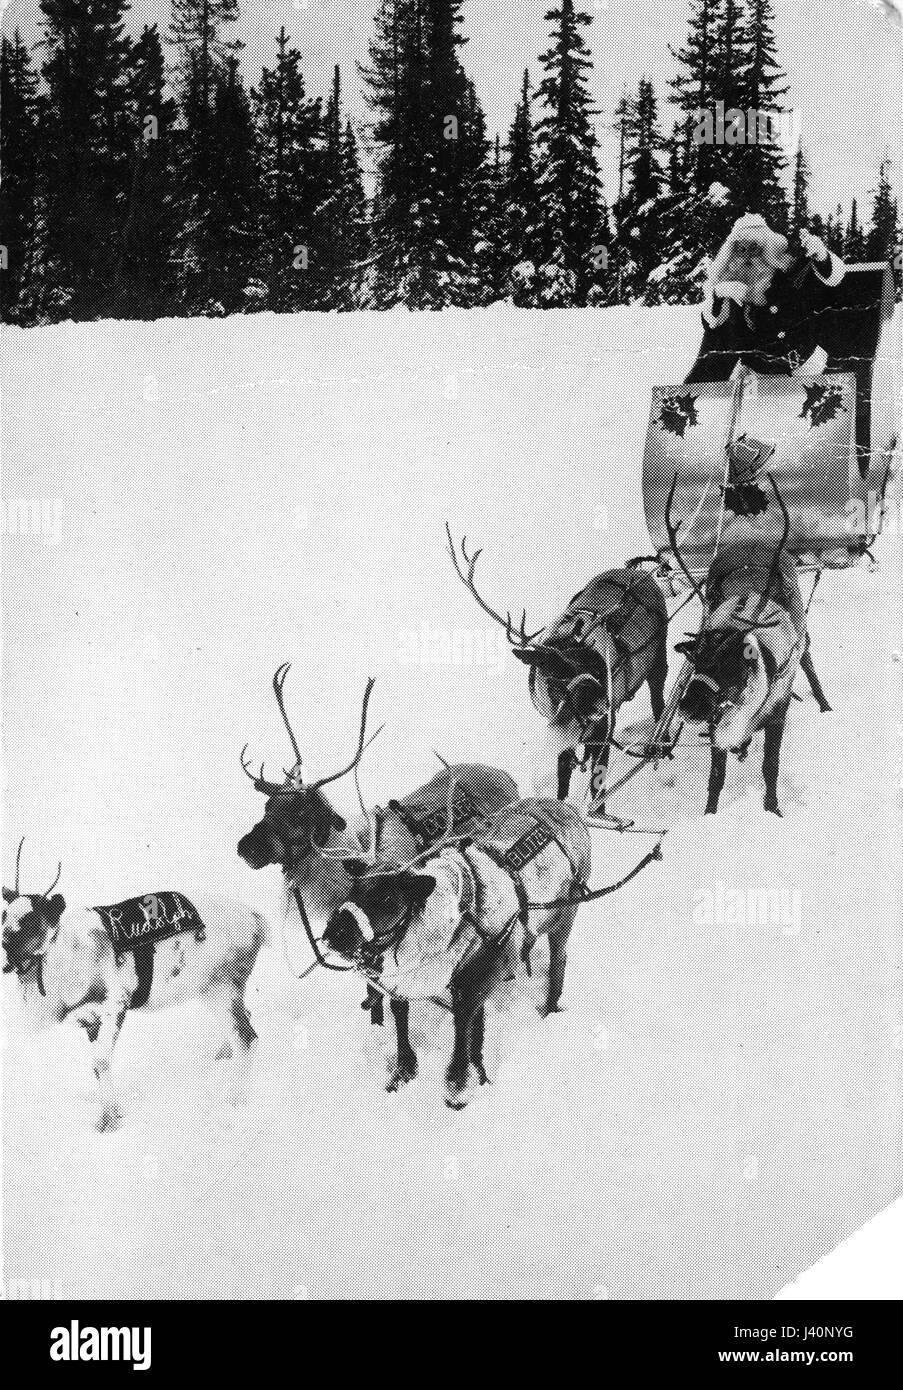 Santa Clause in a silvery sleigh, being pulled by five, live Reindeer.  They are going down a snowy hillside, a forest of live evergreen trees behind them.  Santa's sleigh has holly and bells painted on its front.  To see my other Christmas-related vintage images, Search:  Prestor  vintage  holiday  vehicle Stock Photo